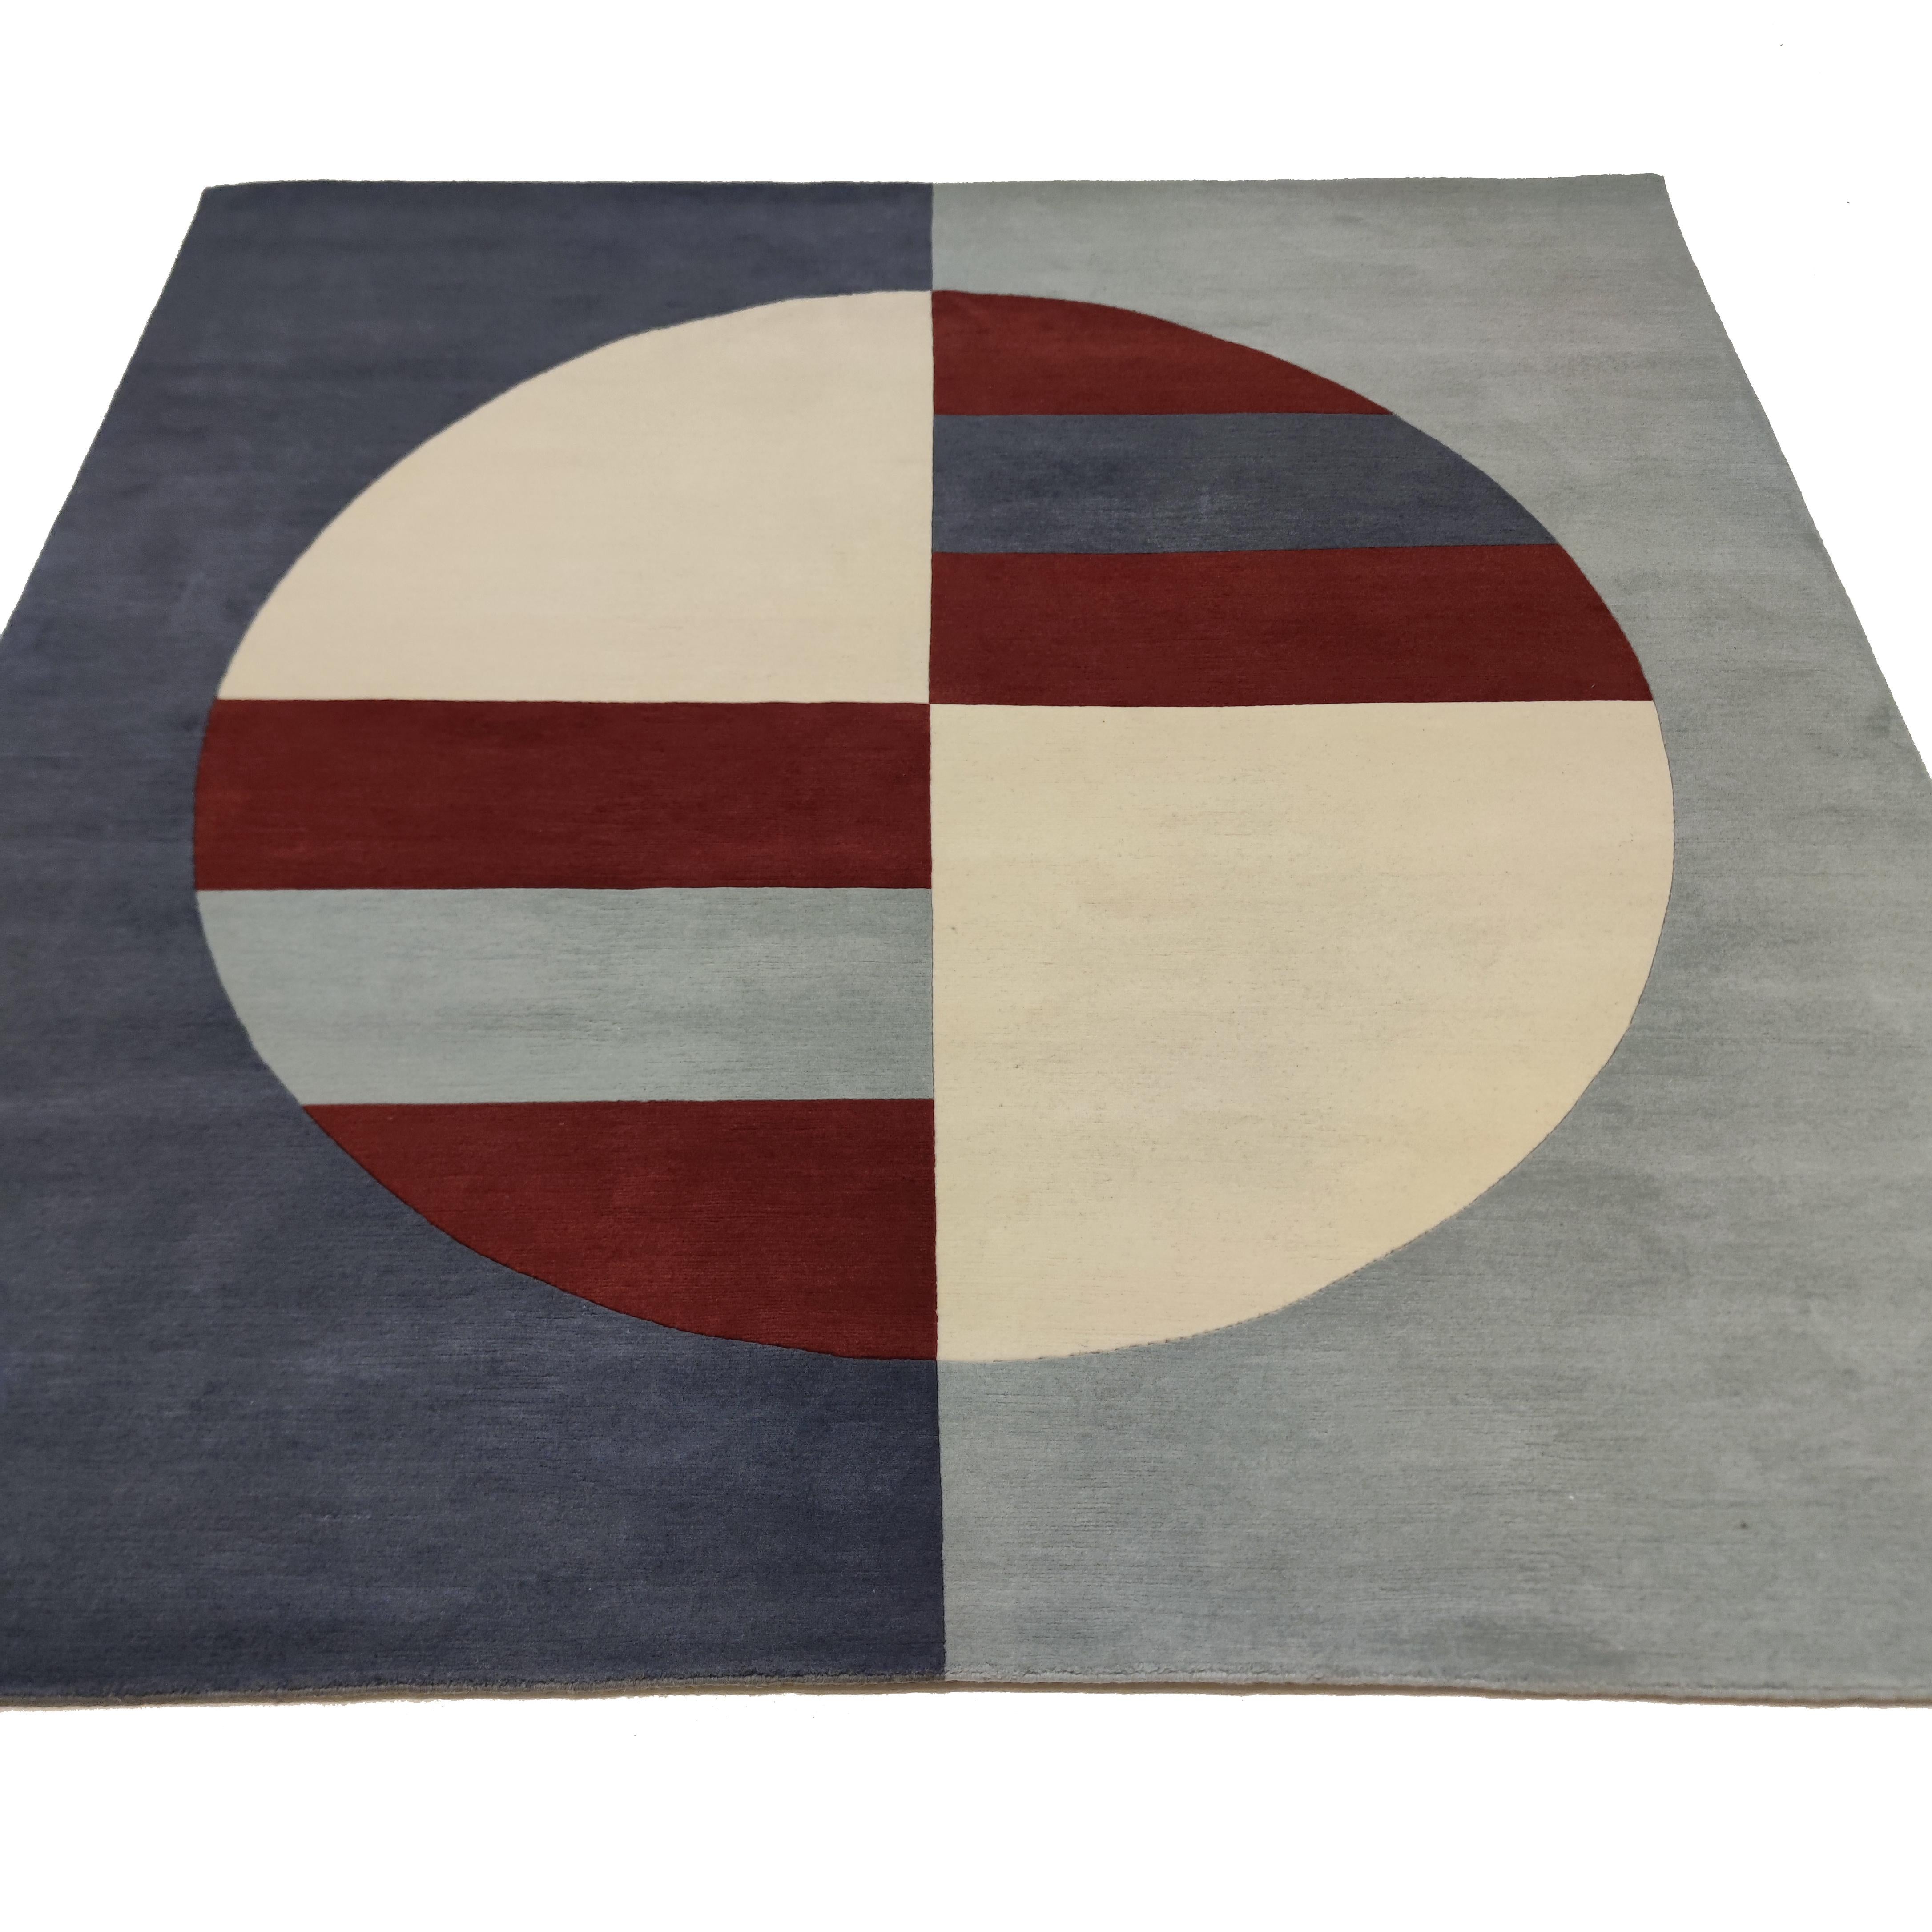 Hand-Knotted 'Equilibrio' Design Rug by Clara Bona for Alberto Levi Gallery For Sale